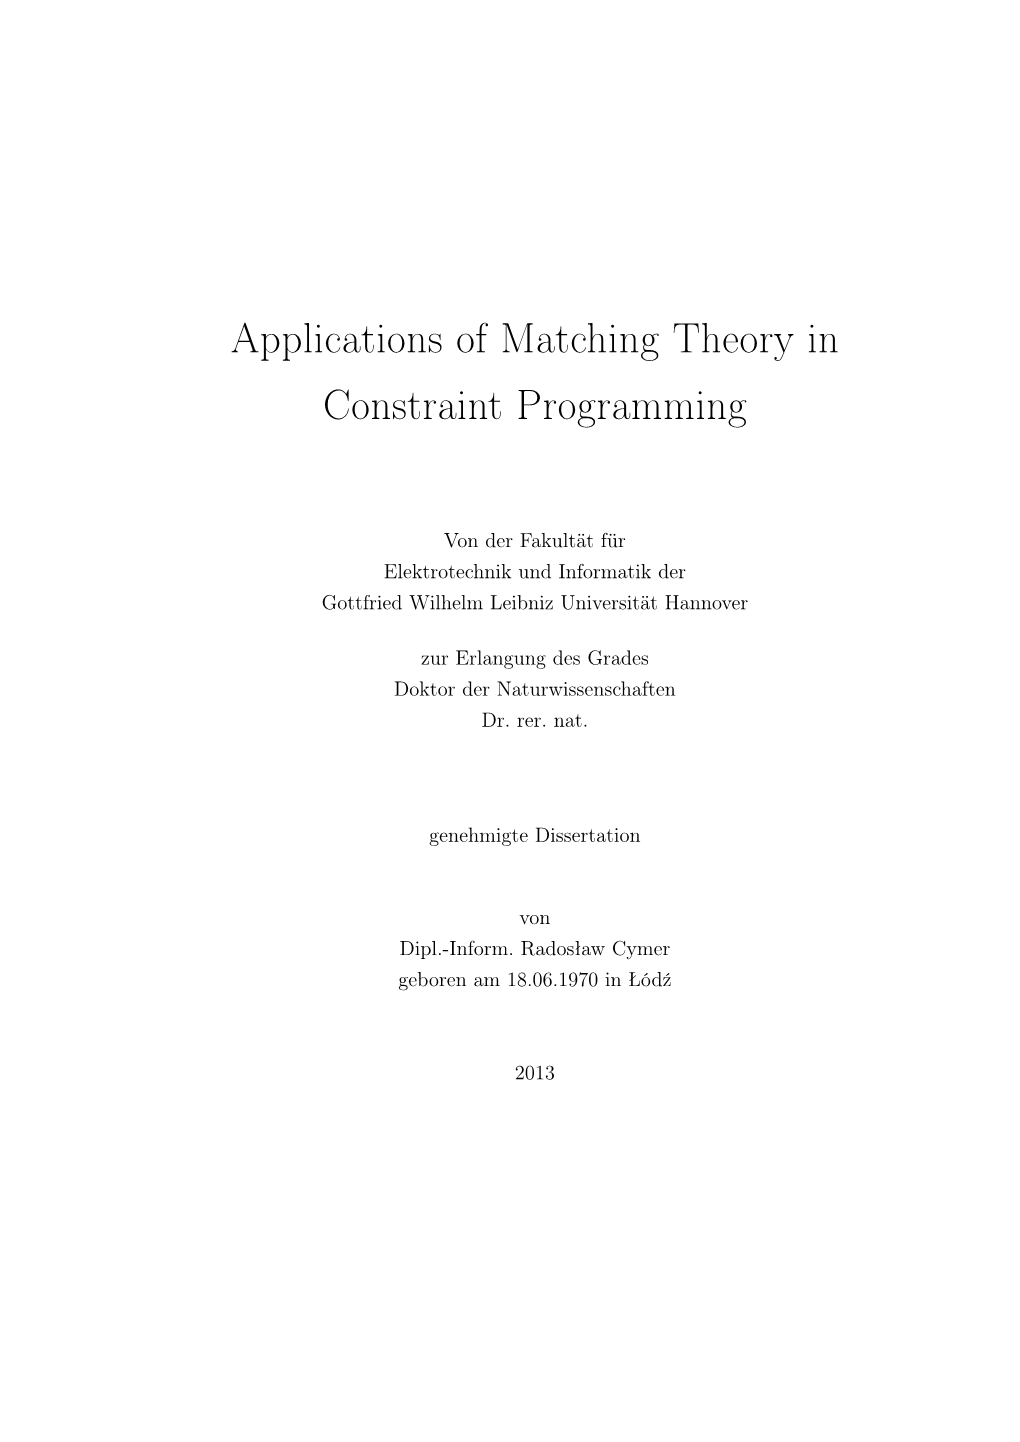 Applications of Matching Theory in Constraint Programming